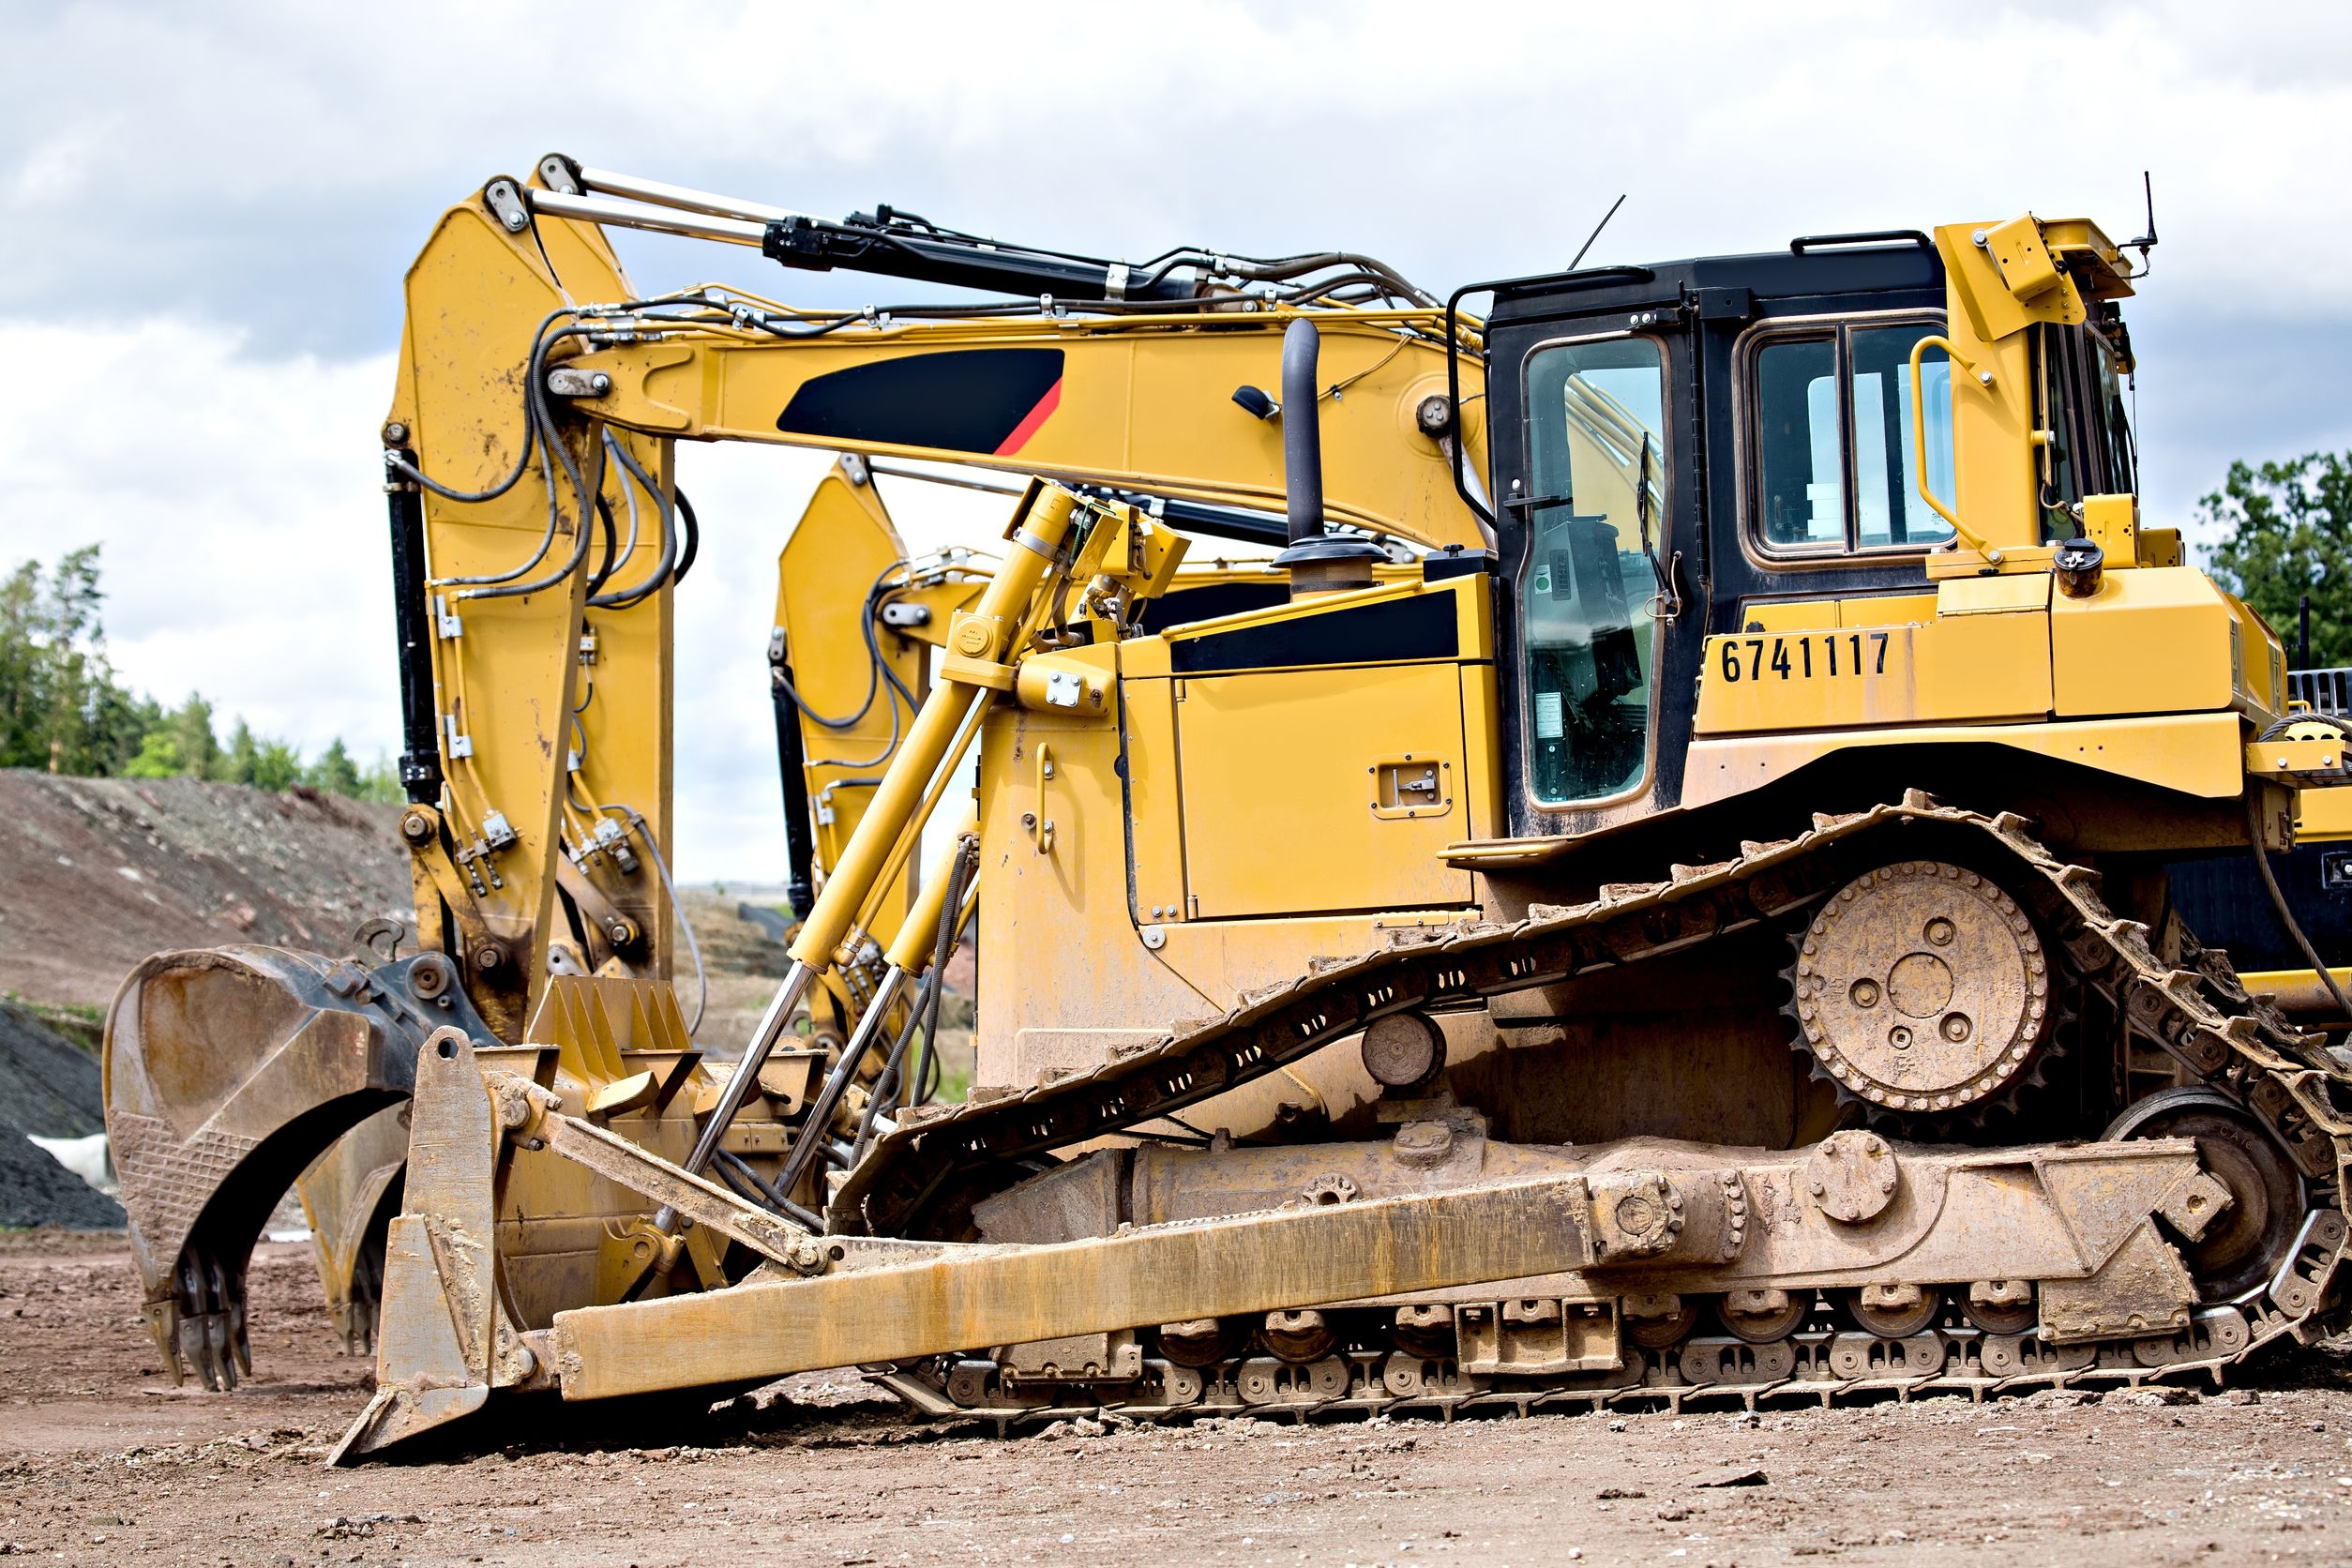 How to Find a Construction Equipment Rental Company